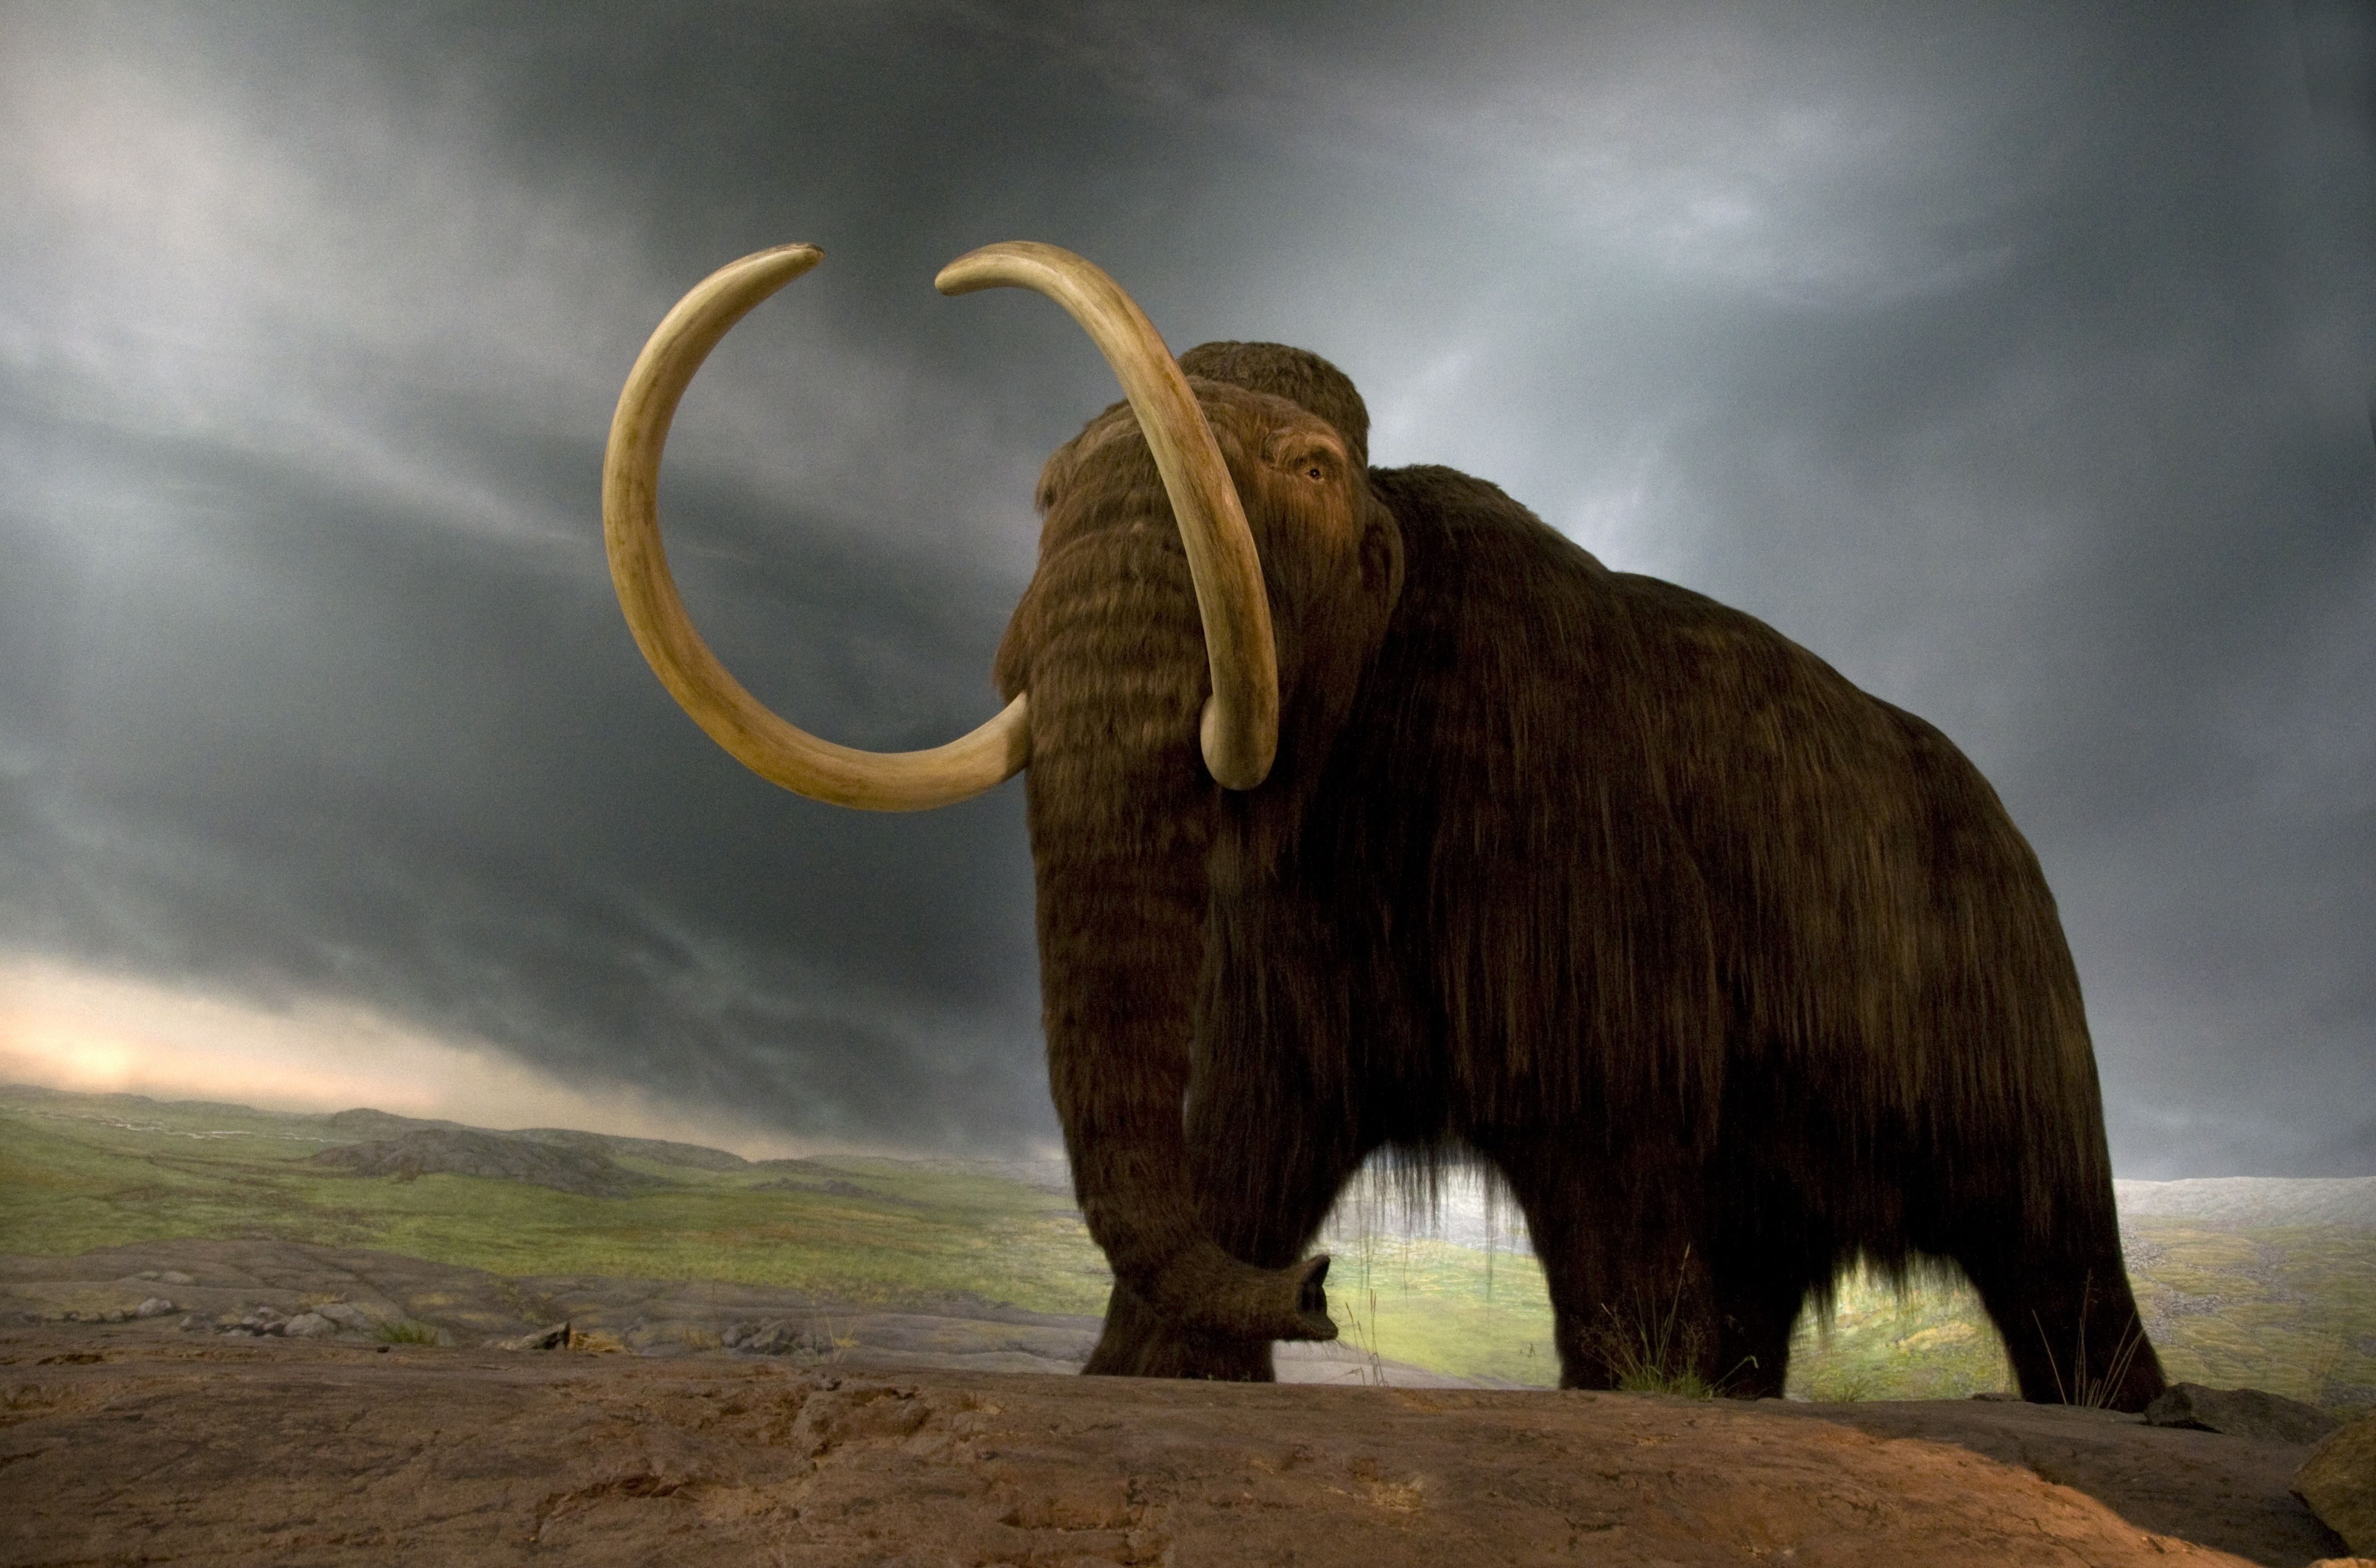 The asteroid may have helped to kill off the Woolly Mammoth